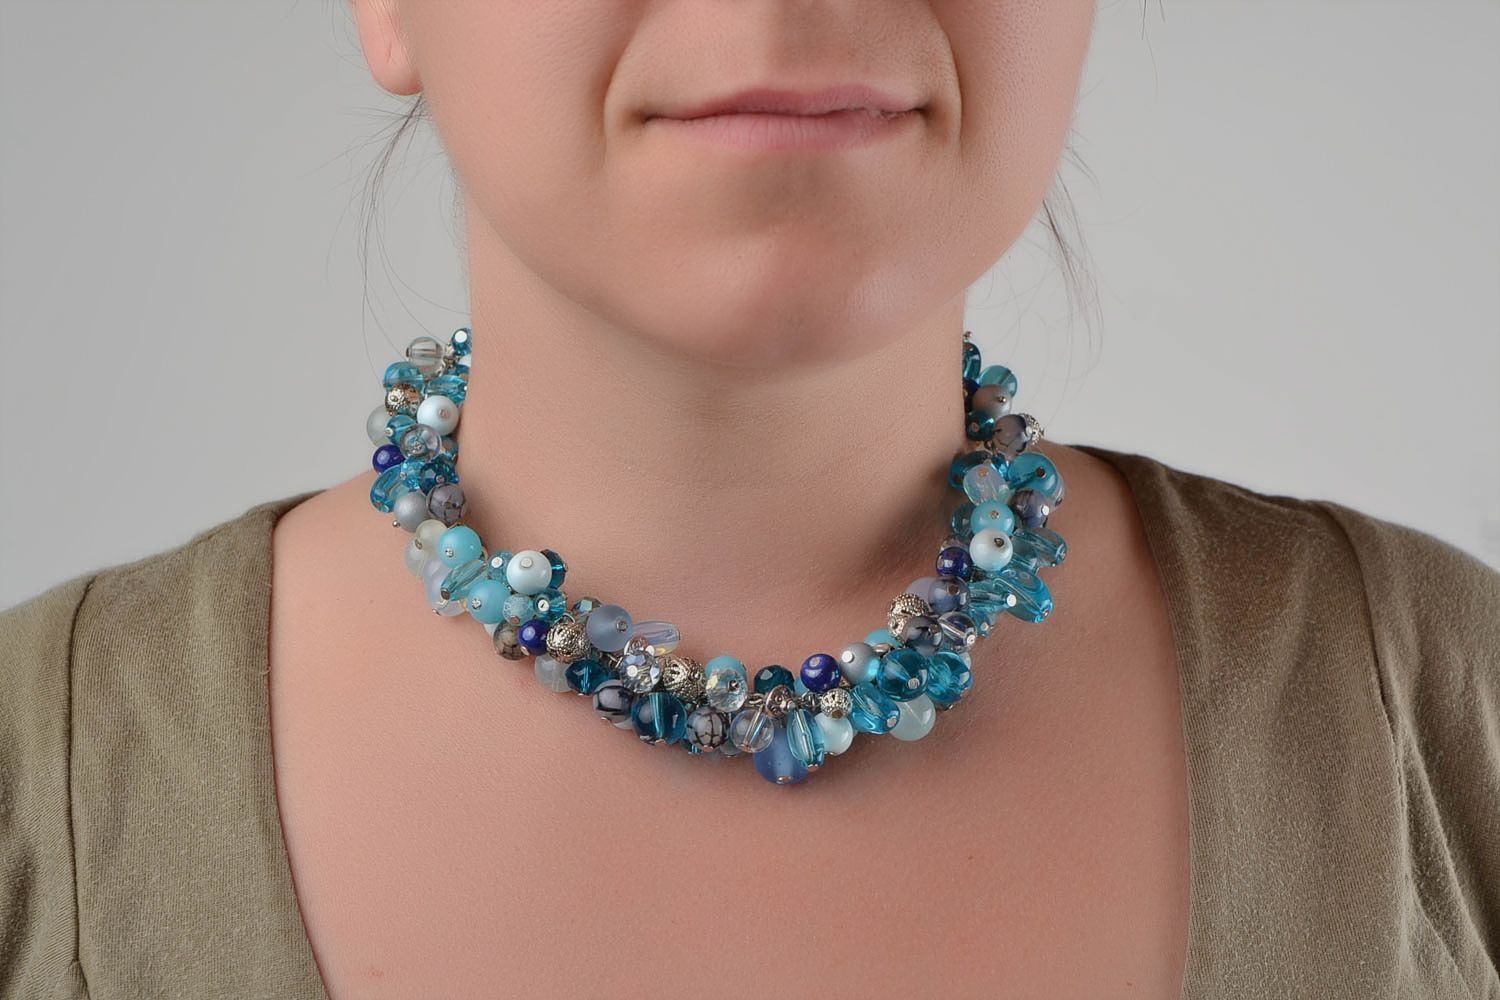 Handmade tender festive blue necklace with agate and tiger's eye stone beads photo 2